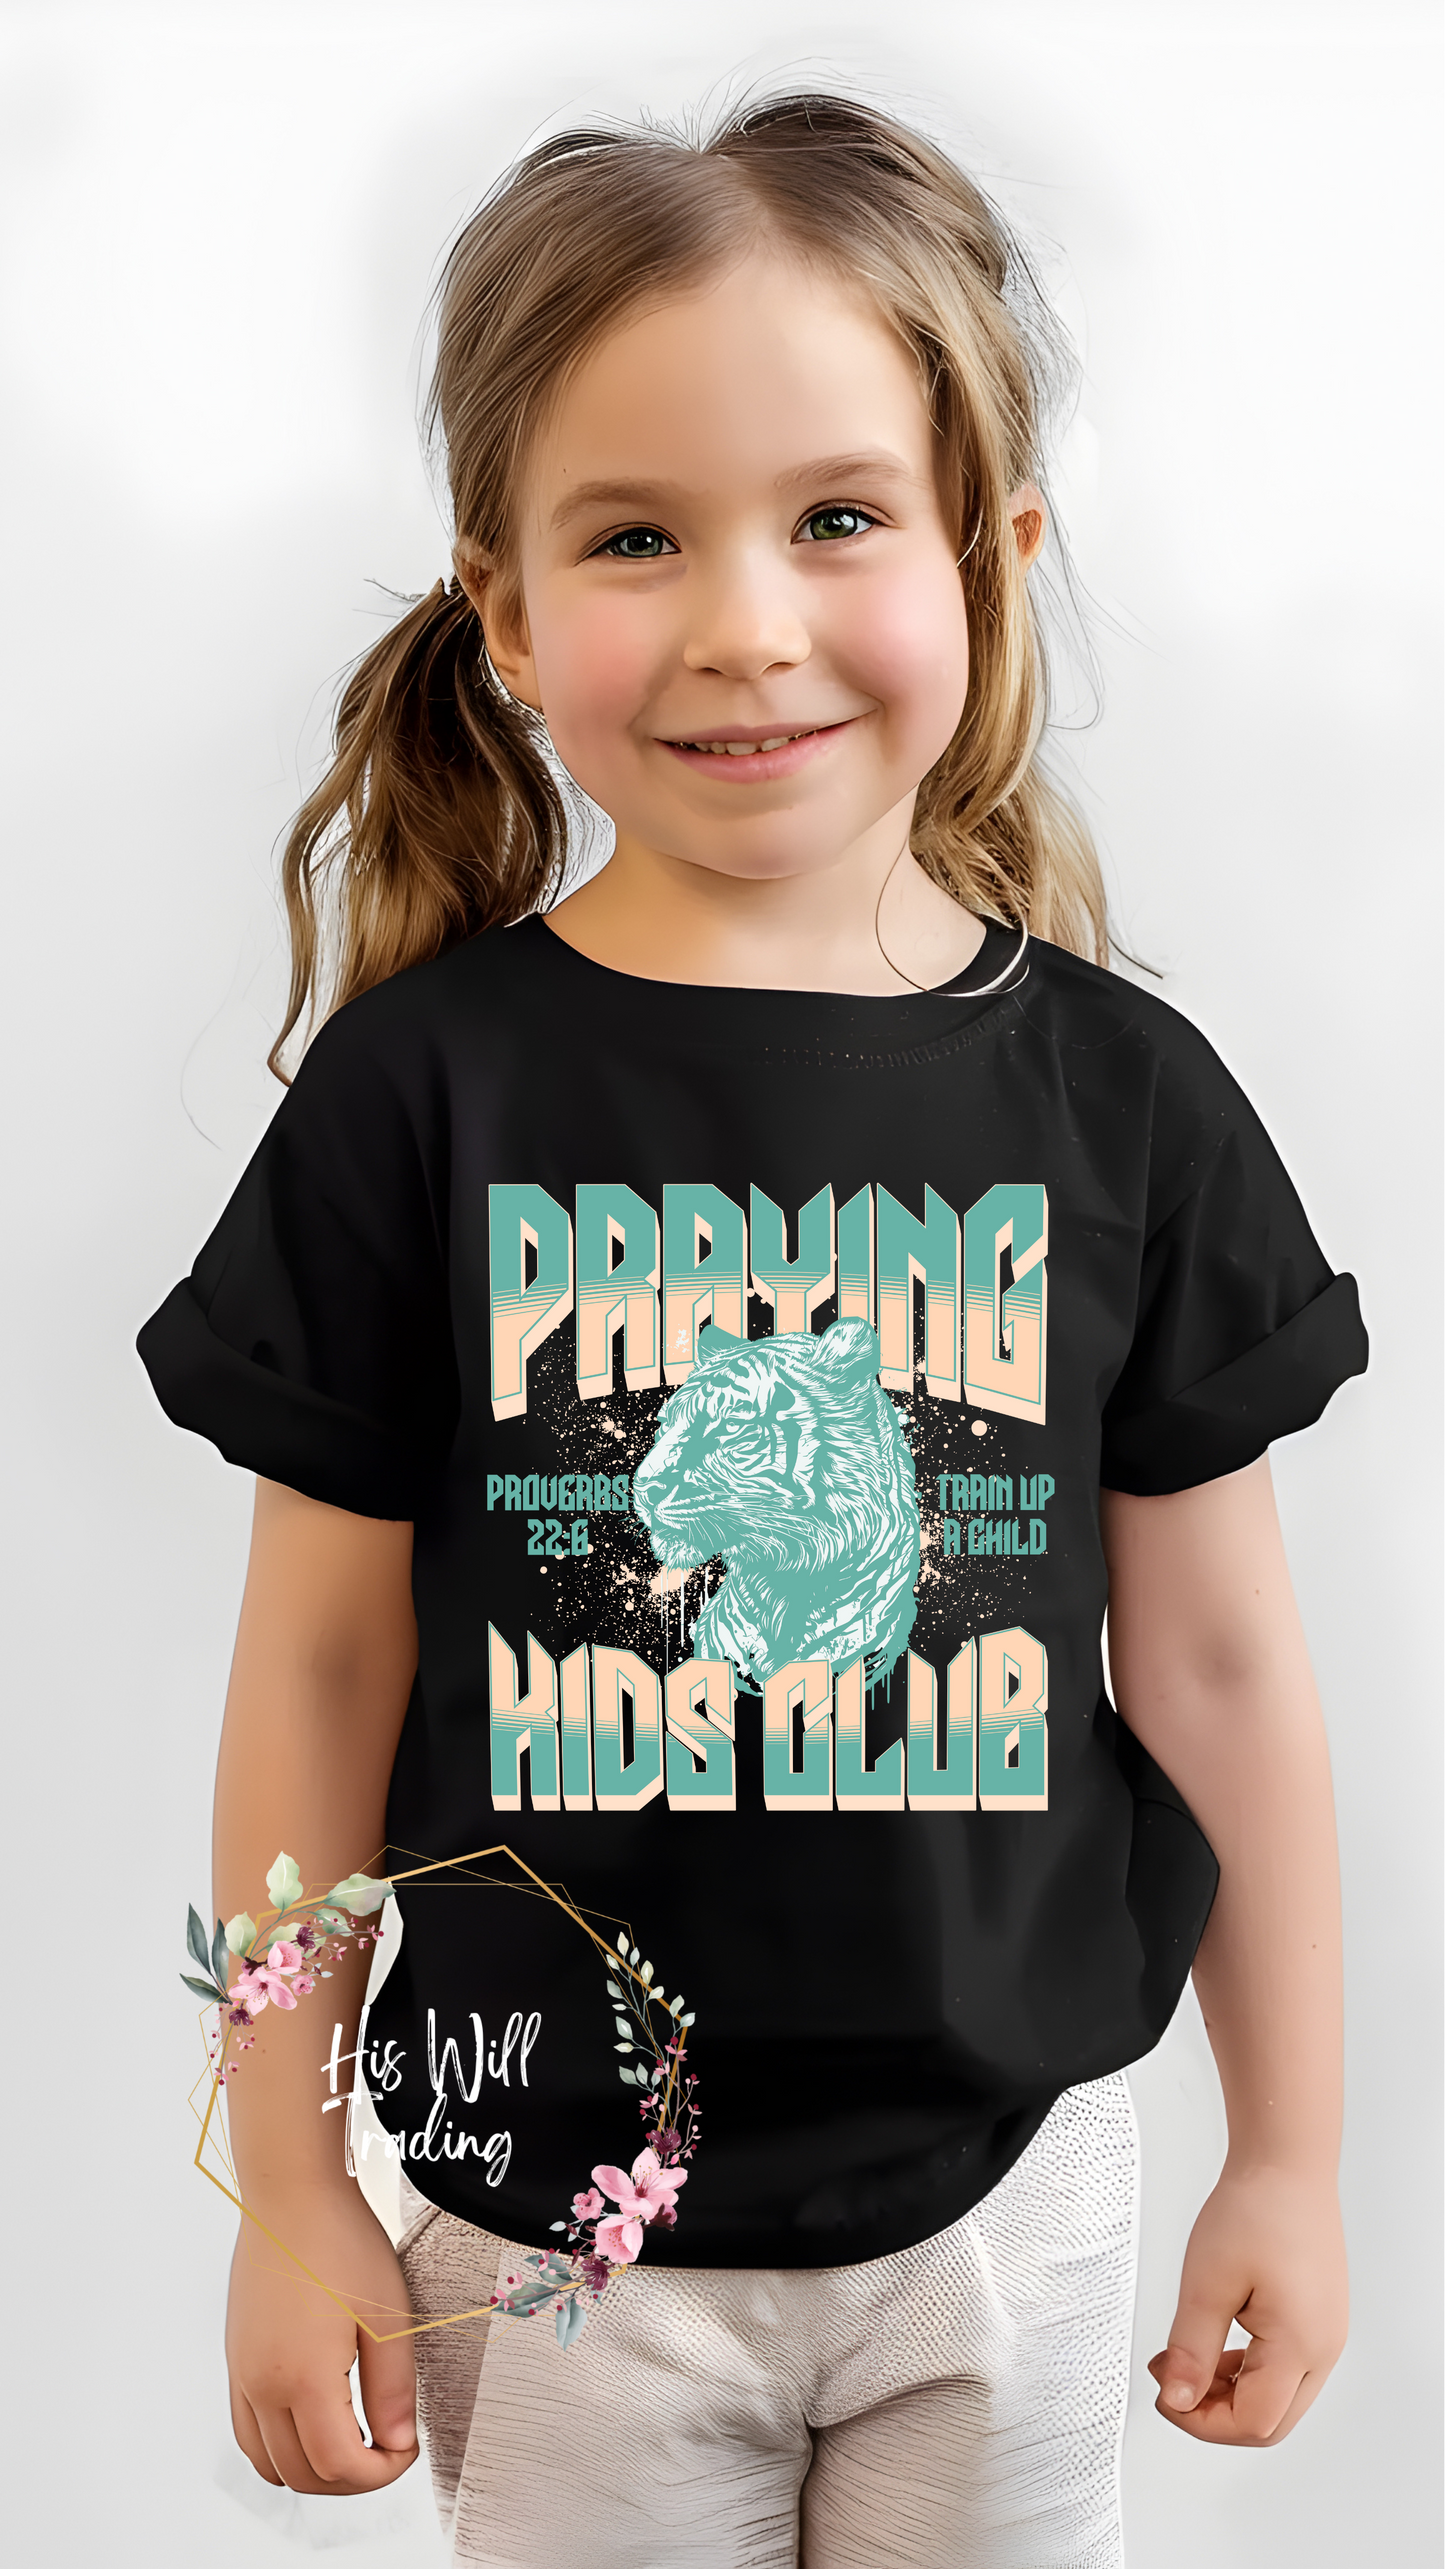 Praying Kids Club Youth, Religious Graphic Tee, Matchy Matchy, Mommy and Me Matching Shirts